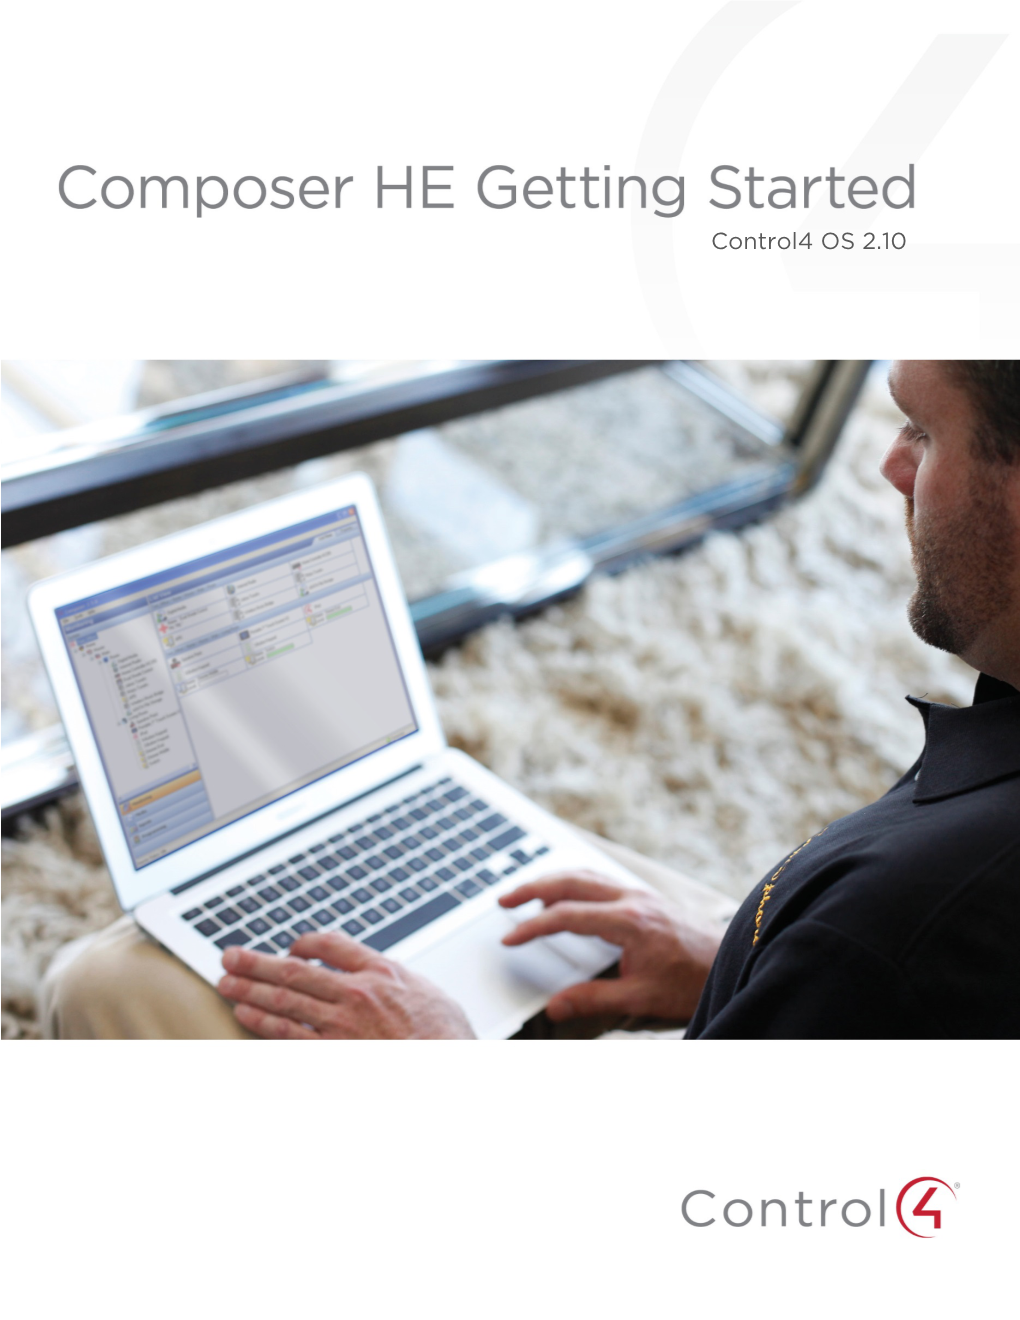 Composer HE Getting Started Guide